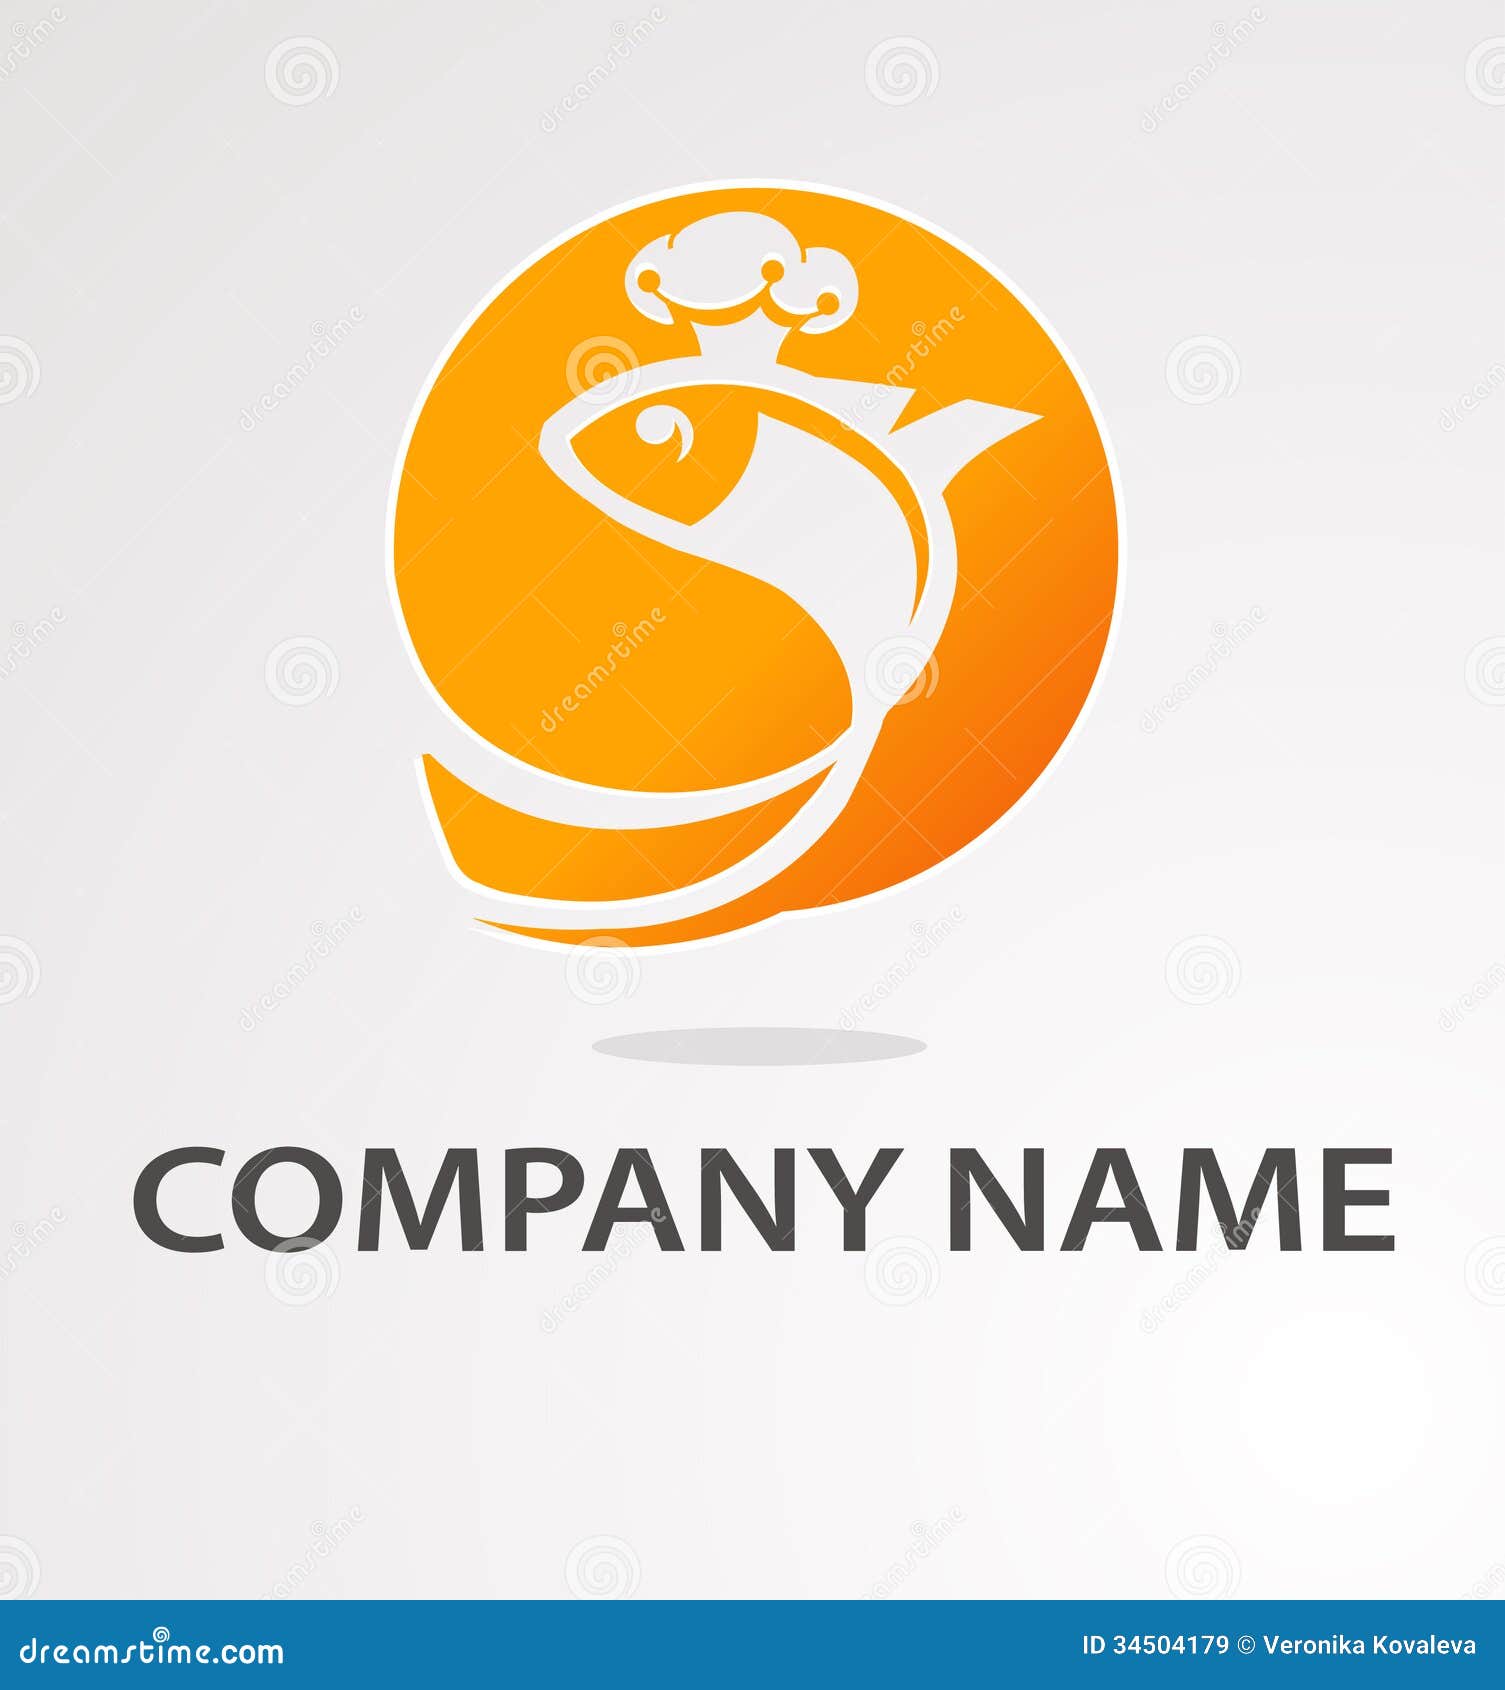 Logo With Golden Fish Royalty Free Stock Images - Image: 34504179